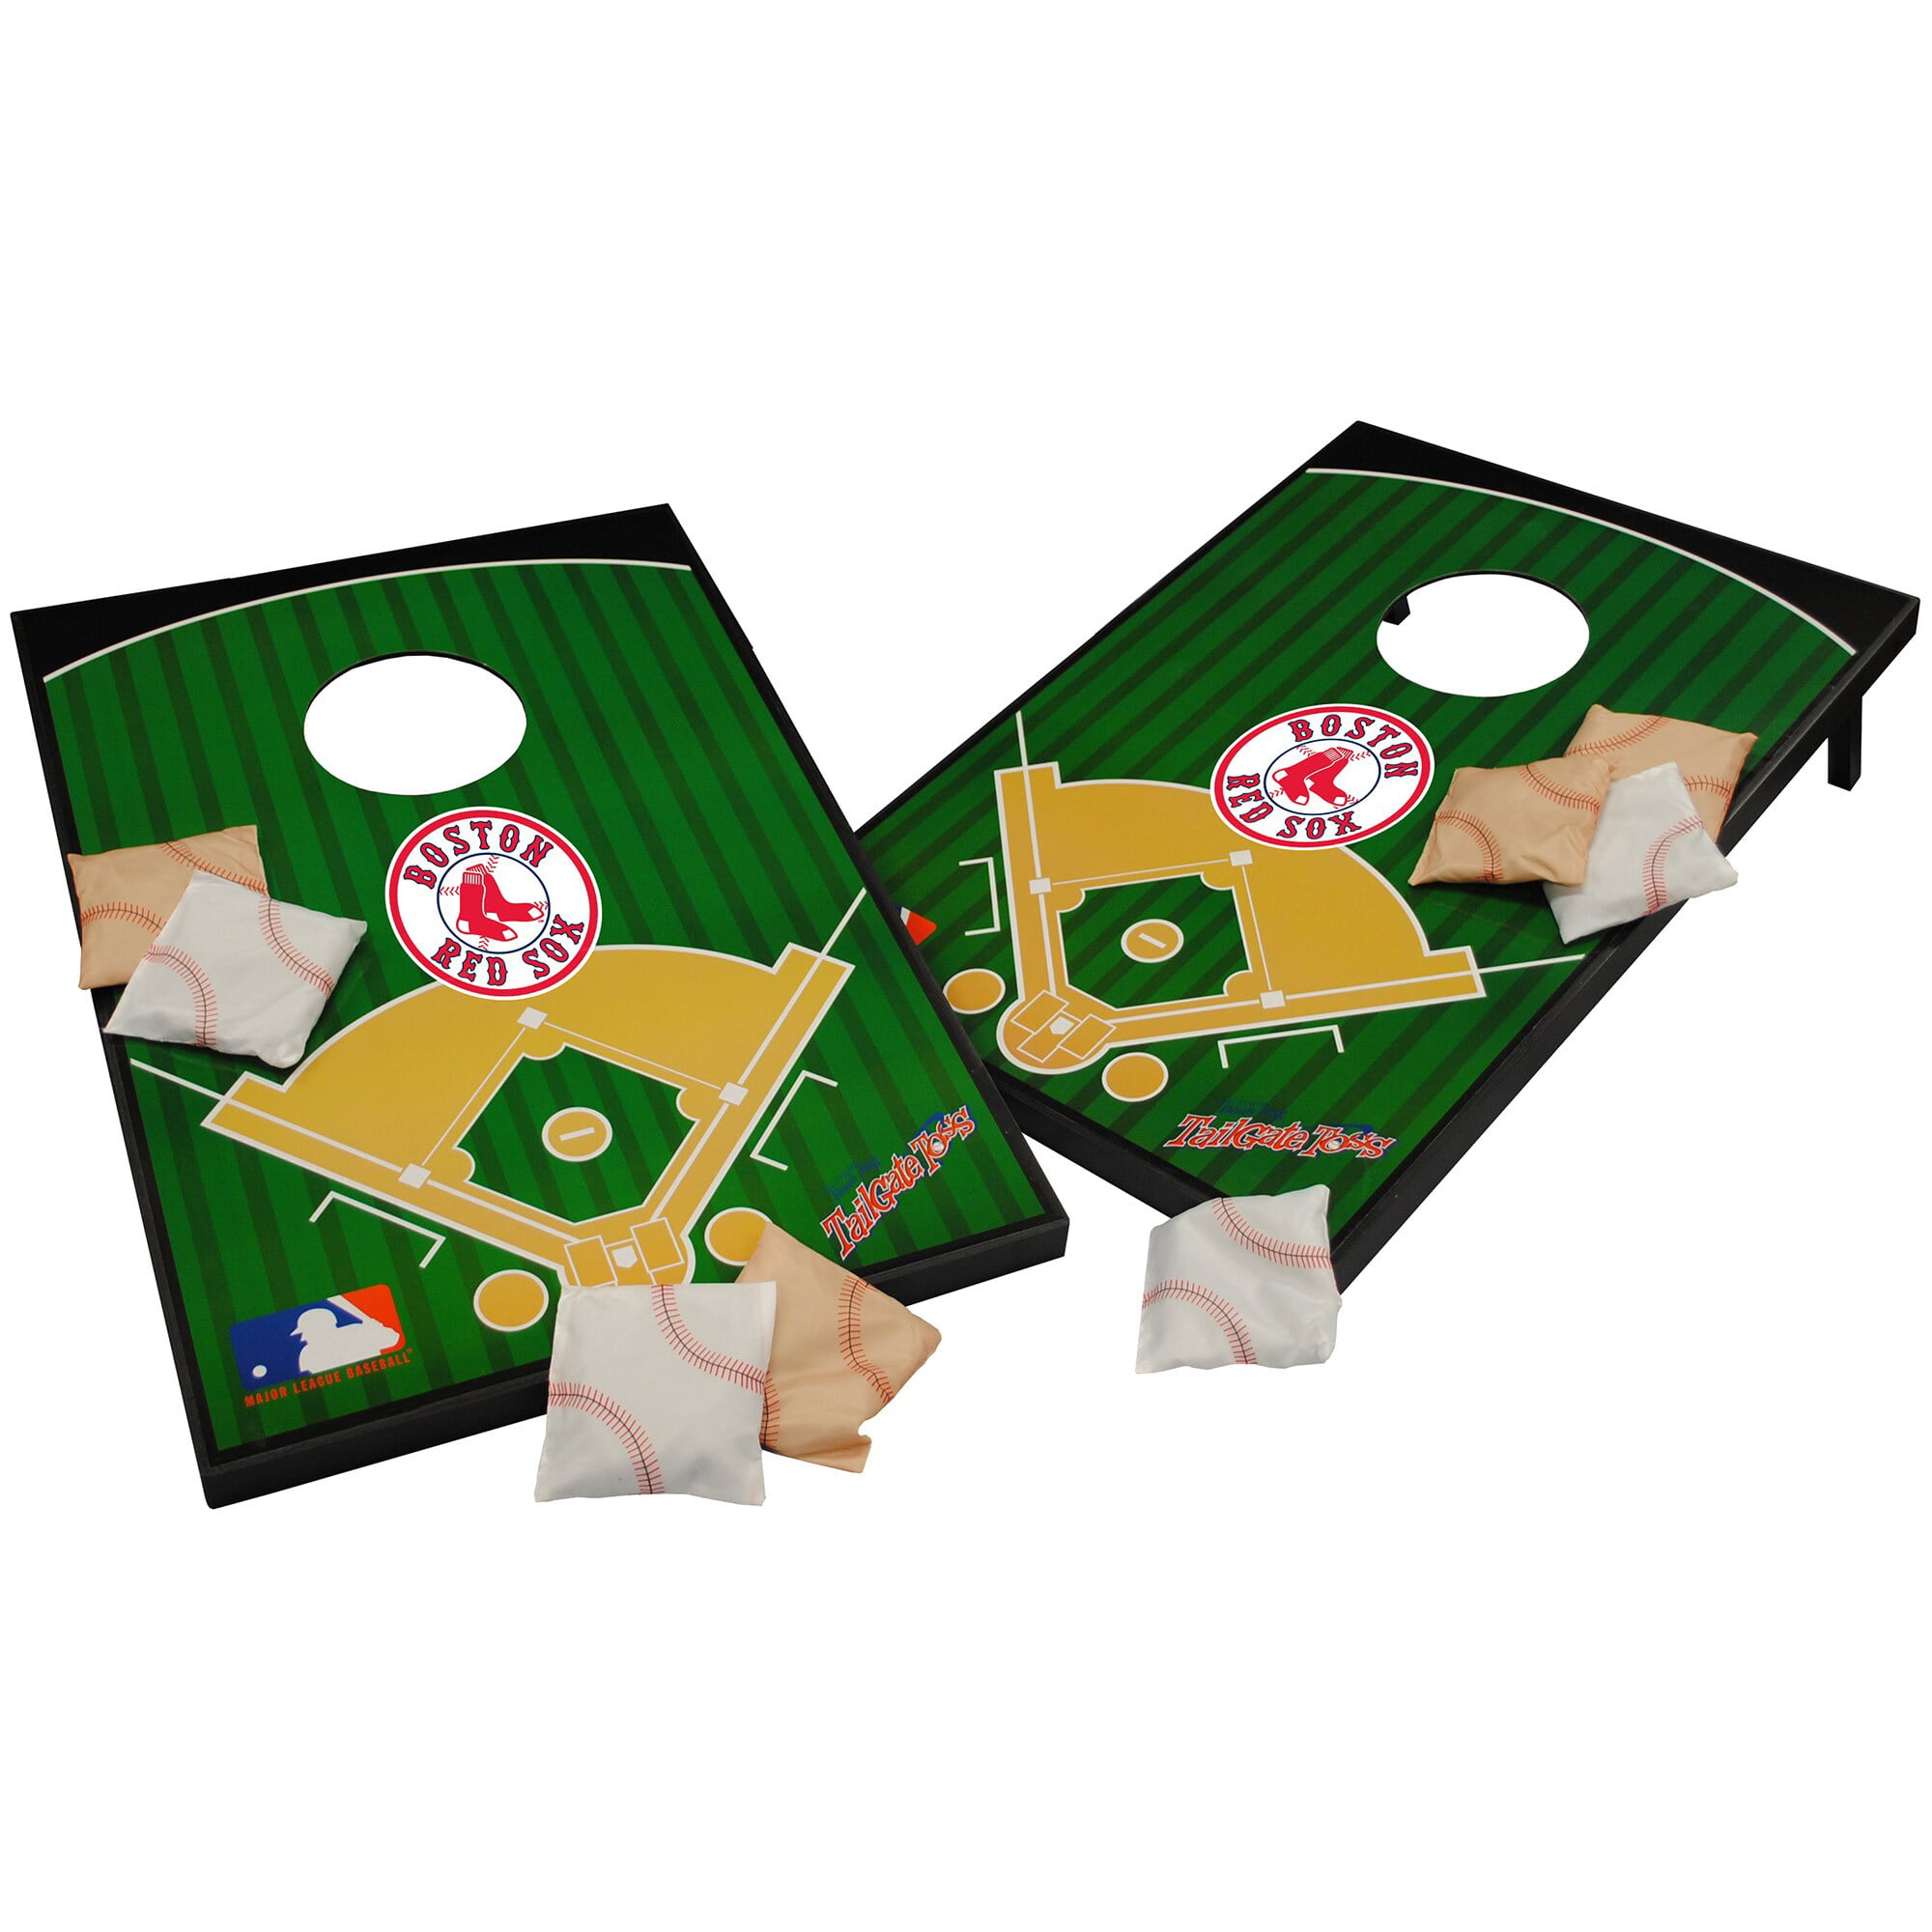 8 Quality Embroidered Cornhole Bags Red Sox Bs and Hanging Sox Corn or Pellets! 